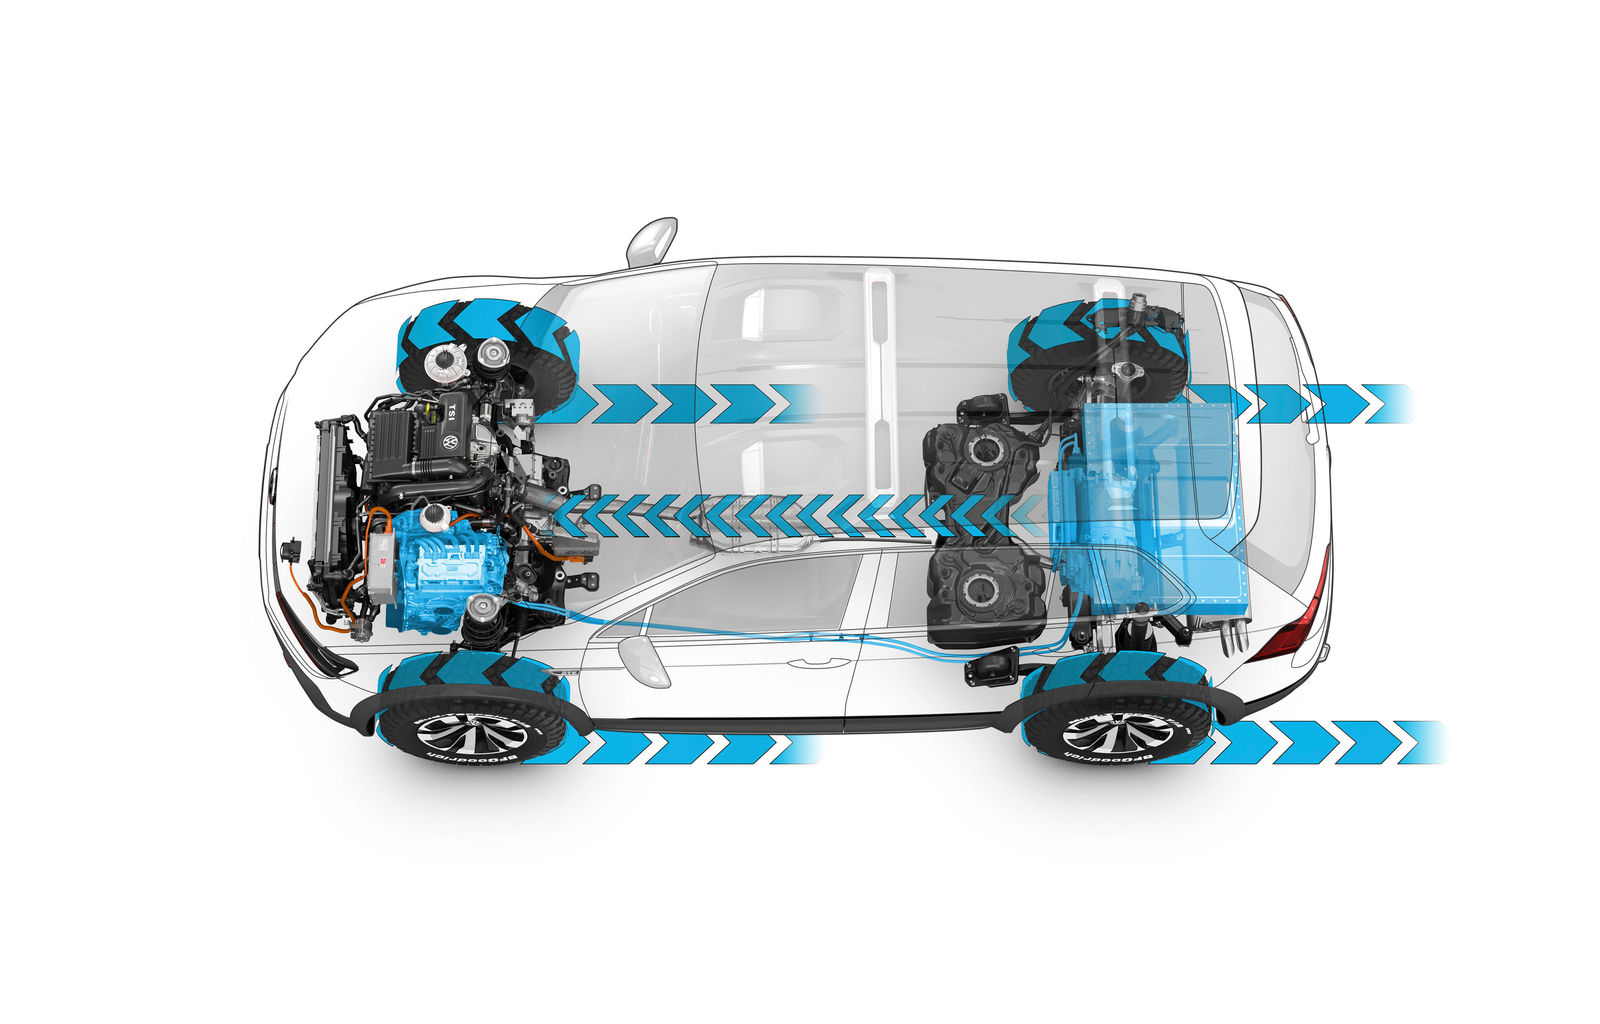 The drive system – plug-in hybrid plus all-wheel drive